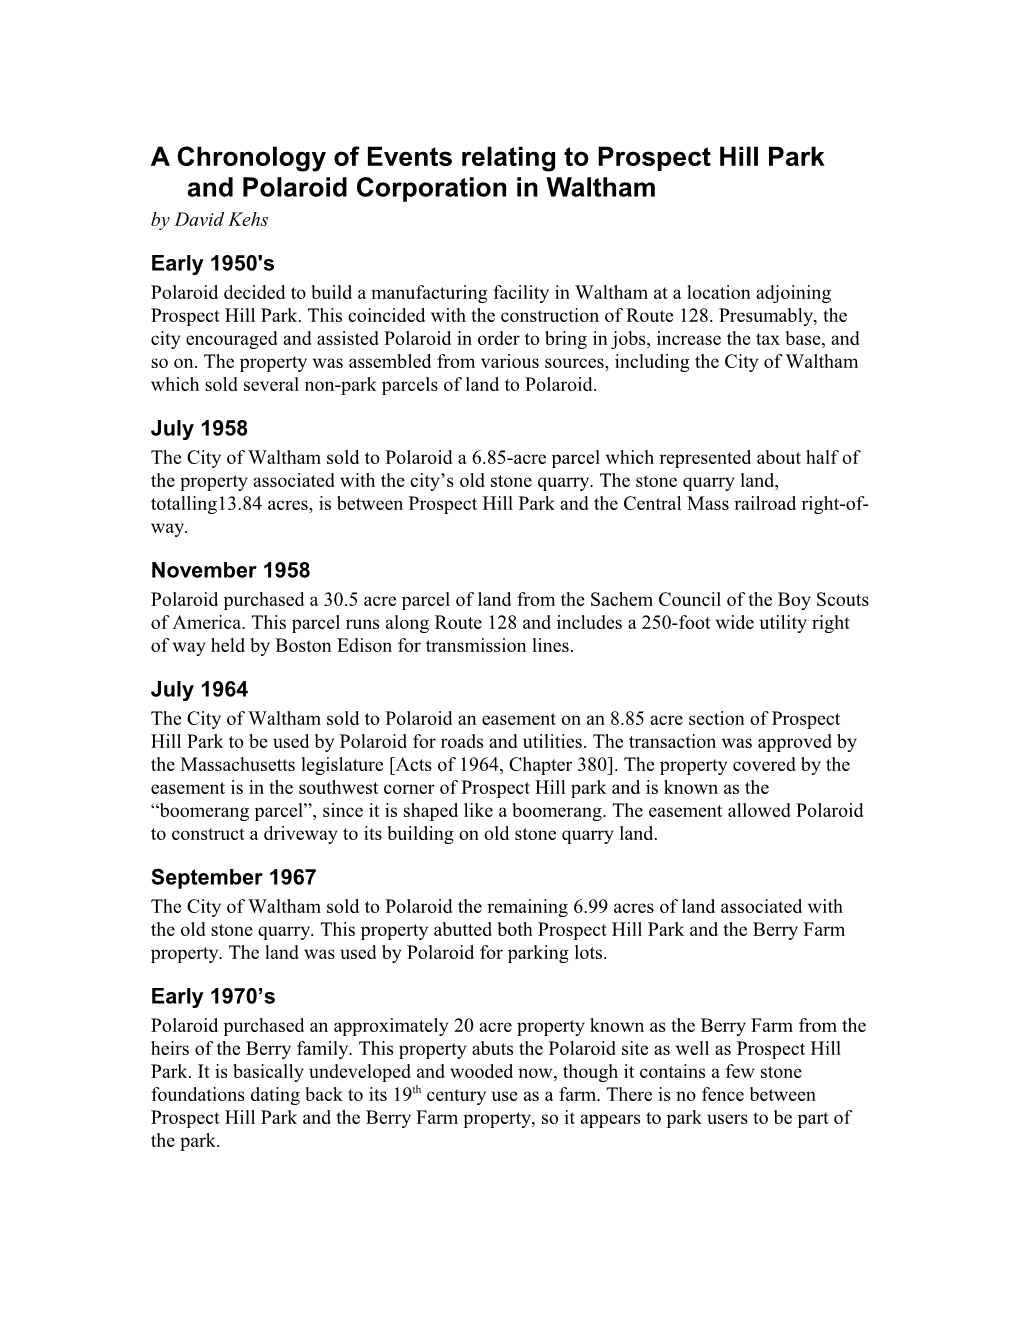 A Chronology of Events Relating to Prospect Hill Park and Polaroid Corporation in Waltham